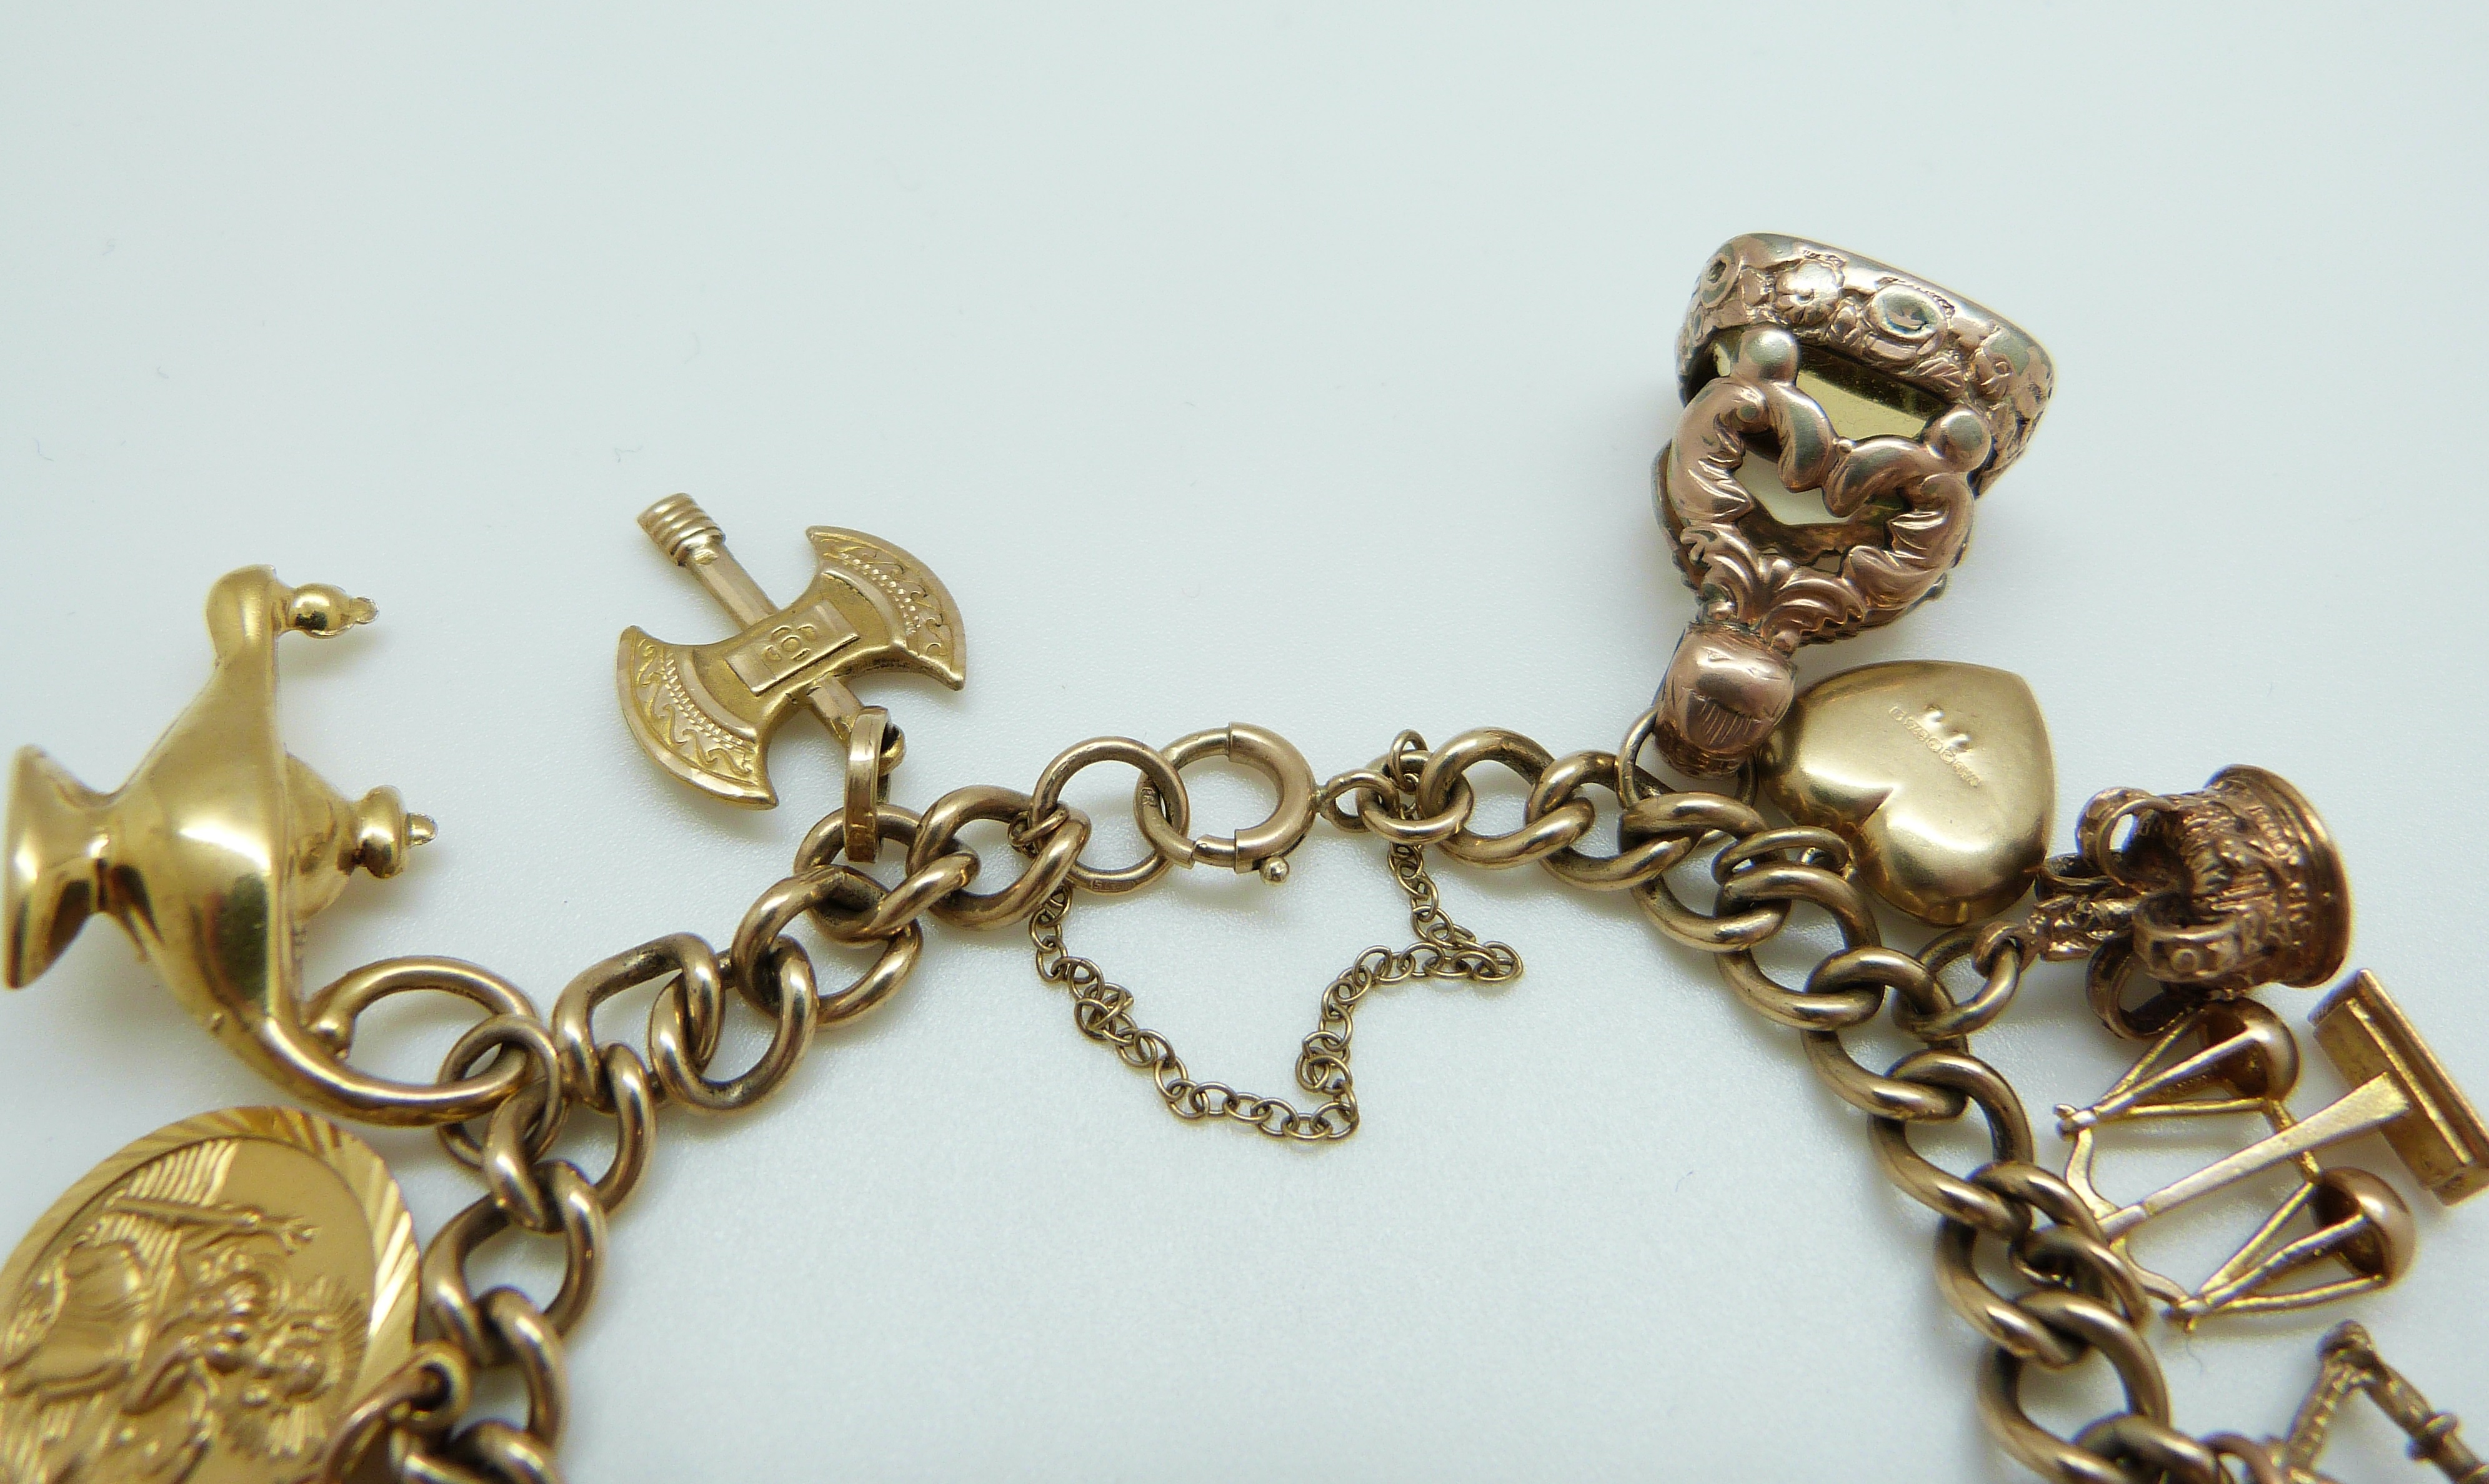 A 9ct gold charm bracelet with eleven 9ct gold charms including a crown, St Christopher, purse, - Image 5 of 8